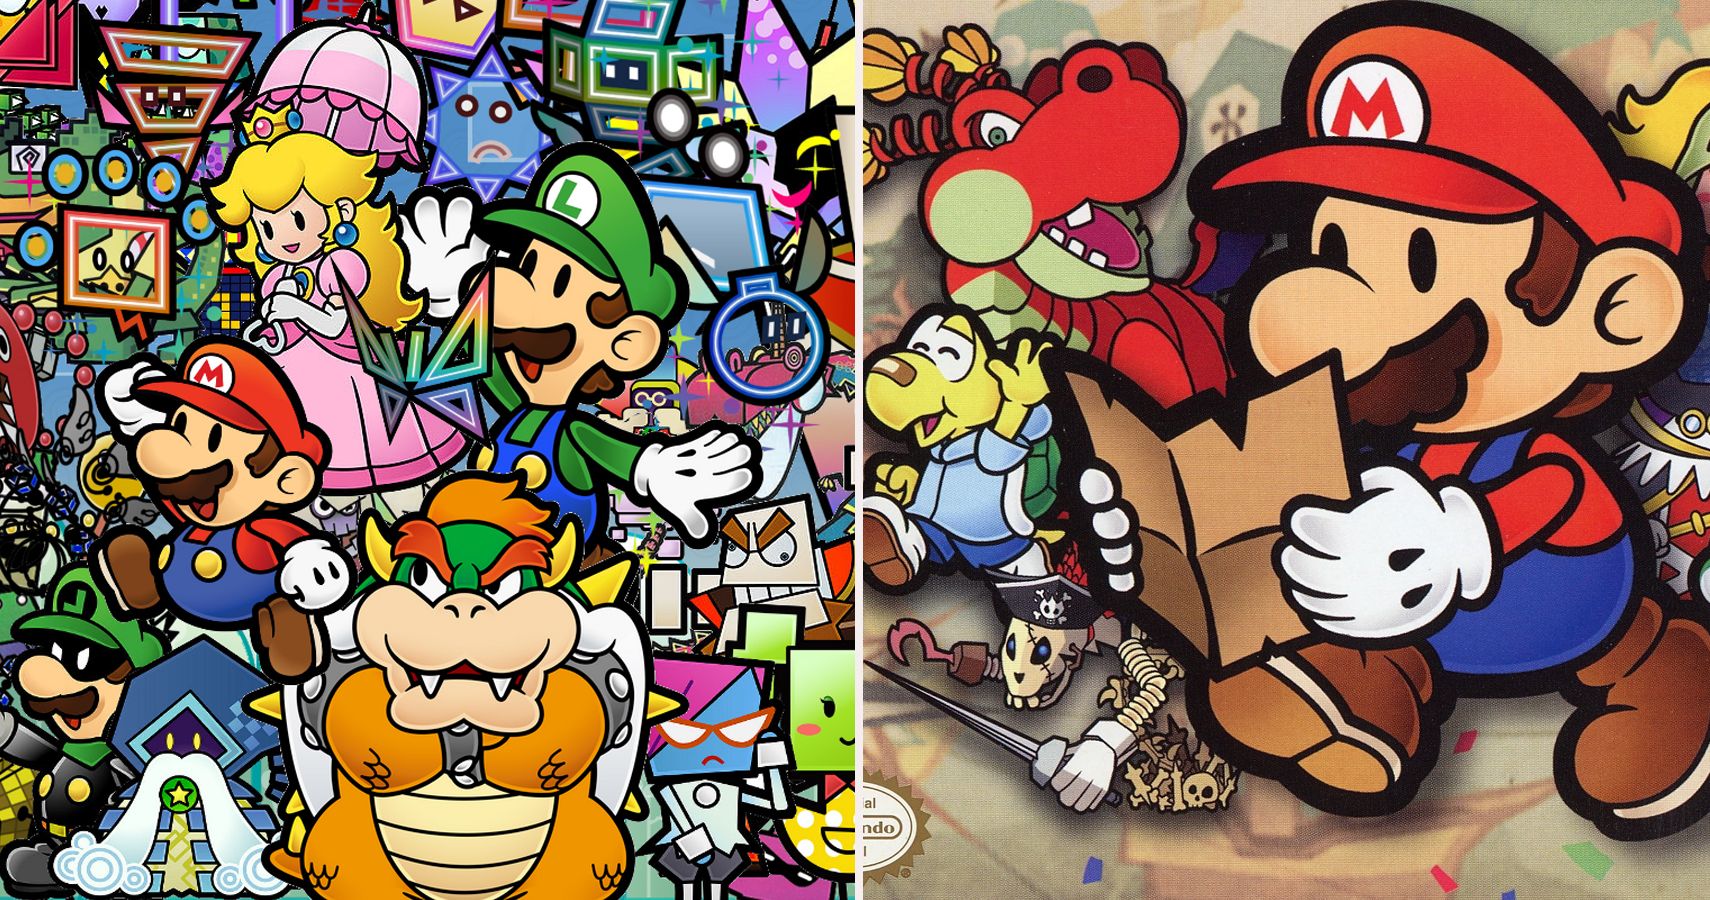 Top 10 Partners In The Paper Mario Series Ranked By Usefulness